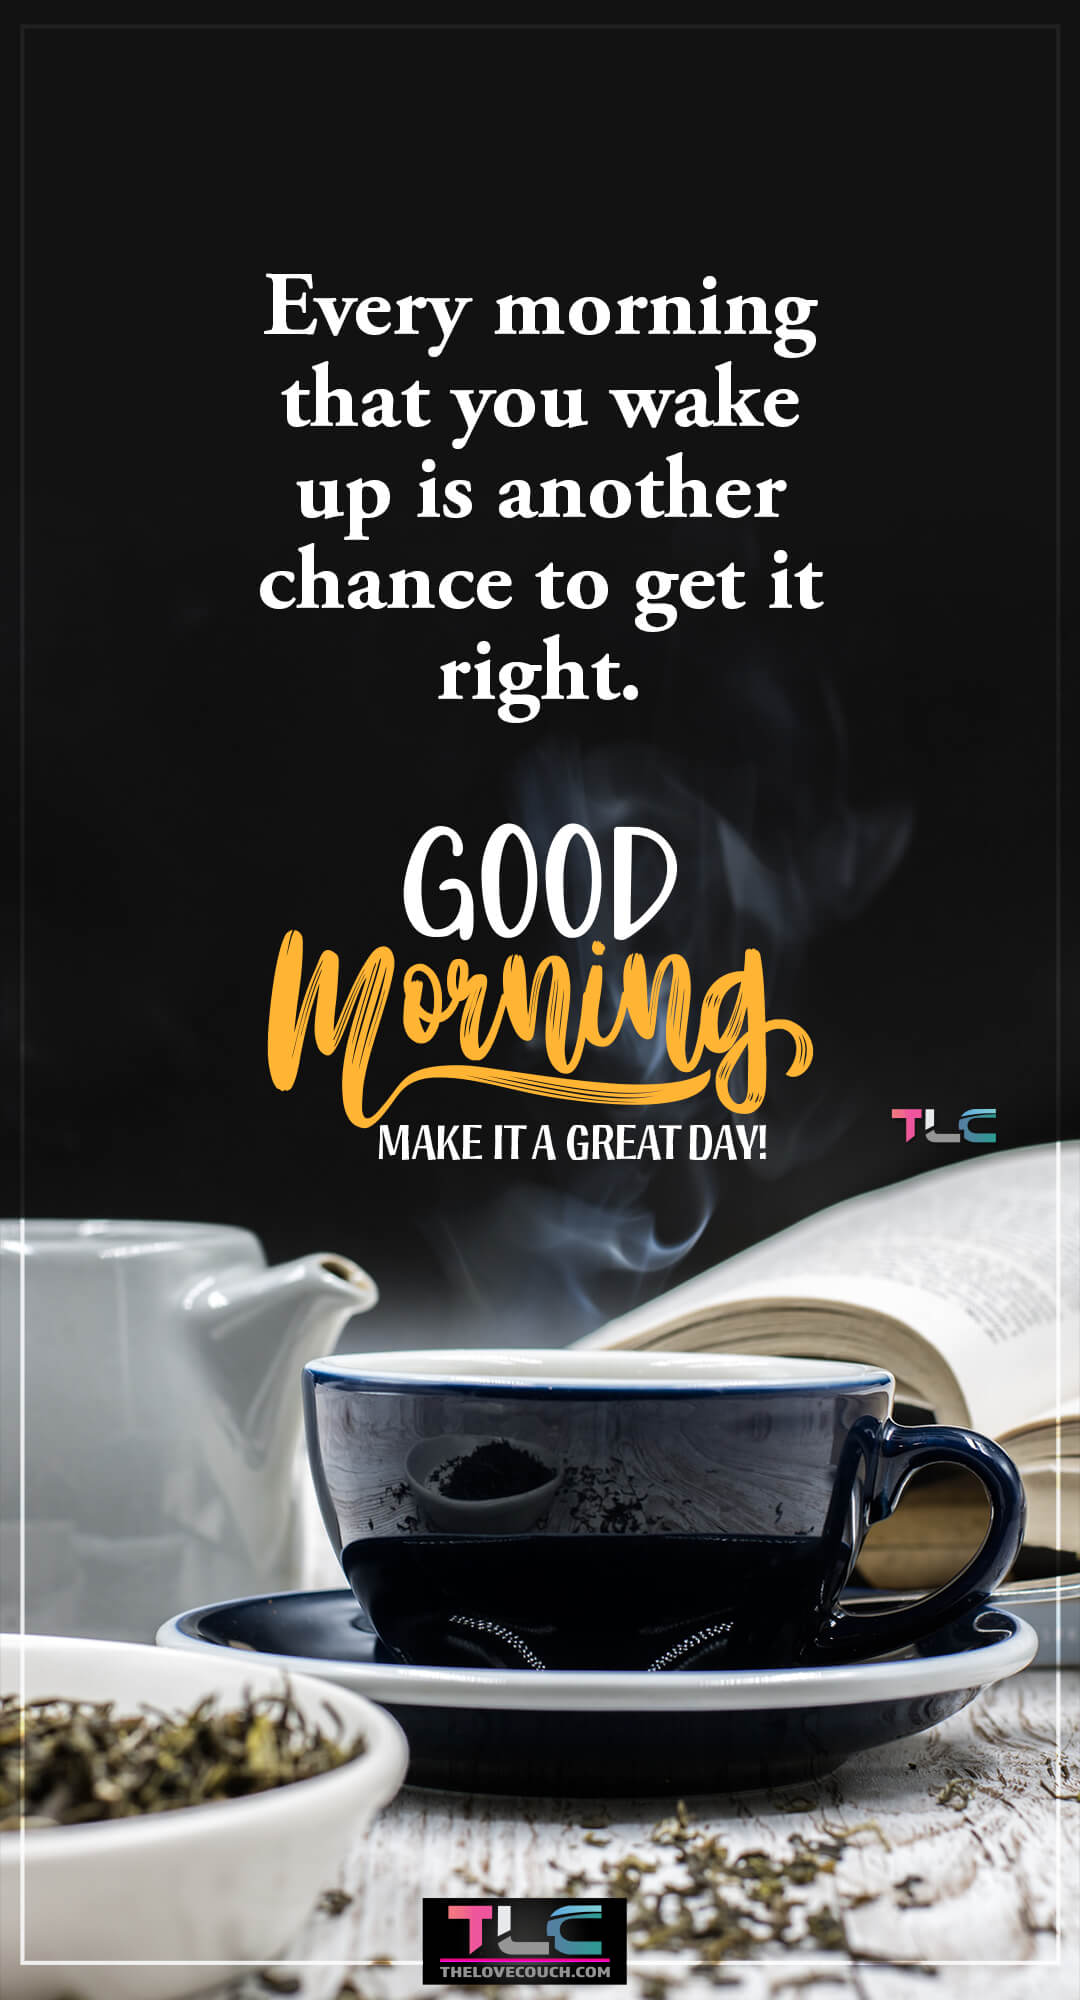 Every morning that you wake up is another chance to get it right. - Beautiful Good Morning Images